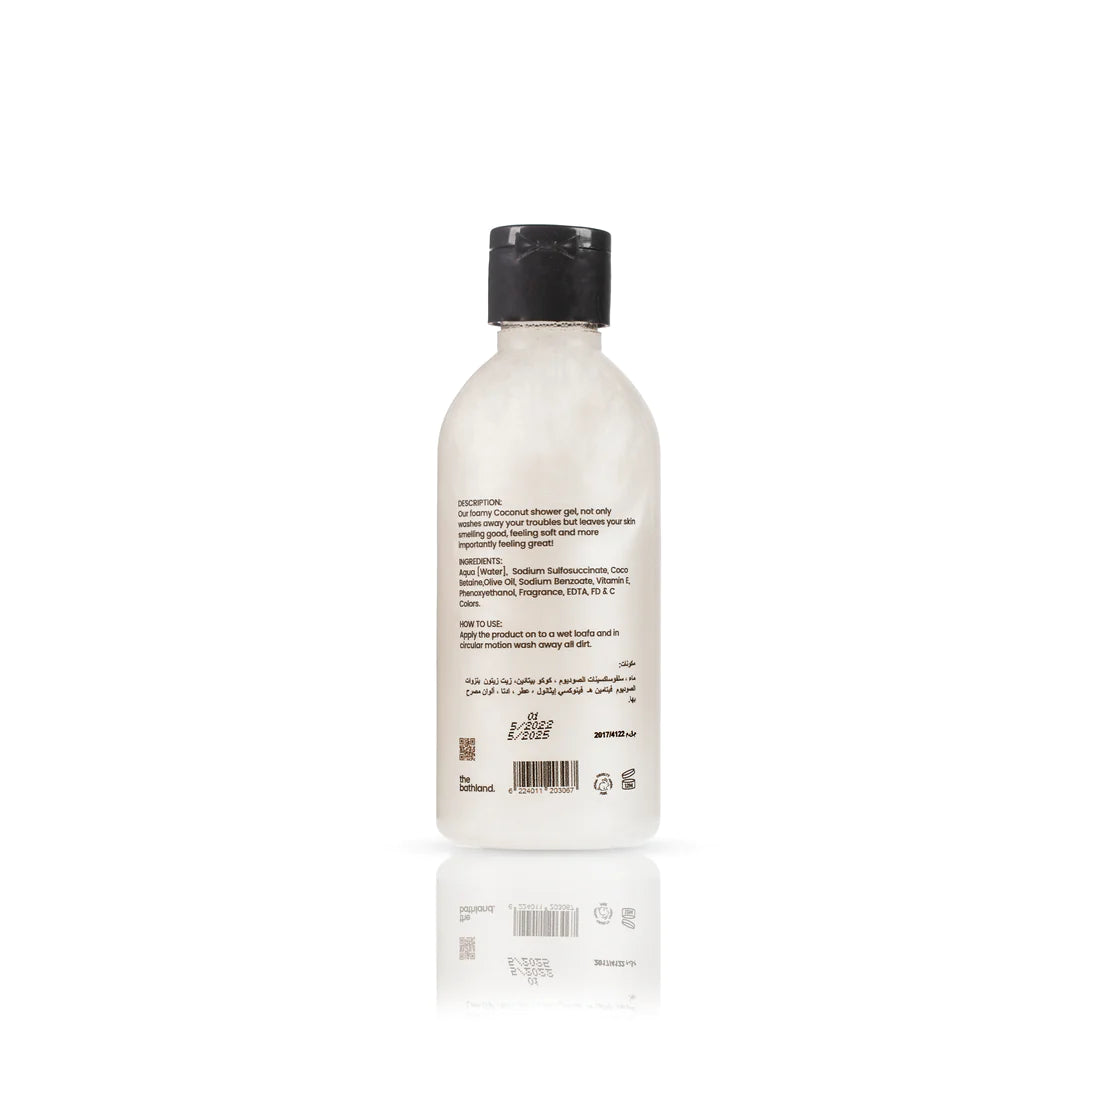 Shop the Coconut Shower Gel by The Bath Land - ZYNAH